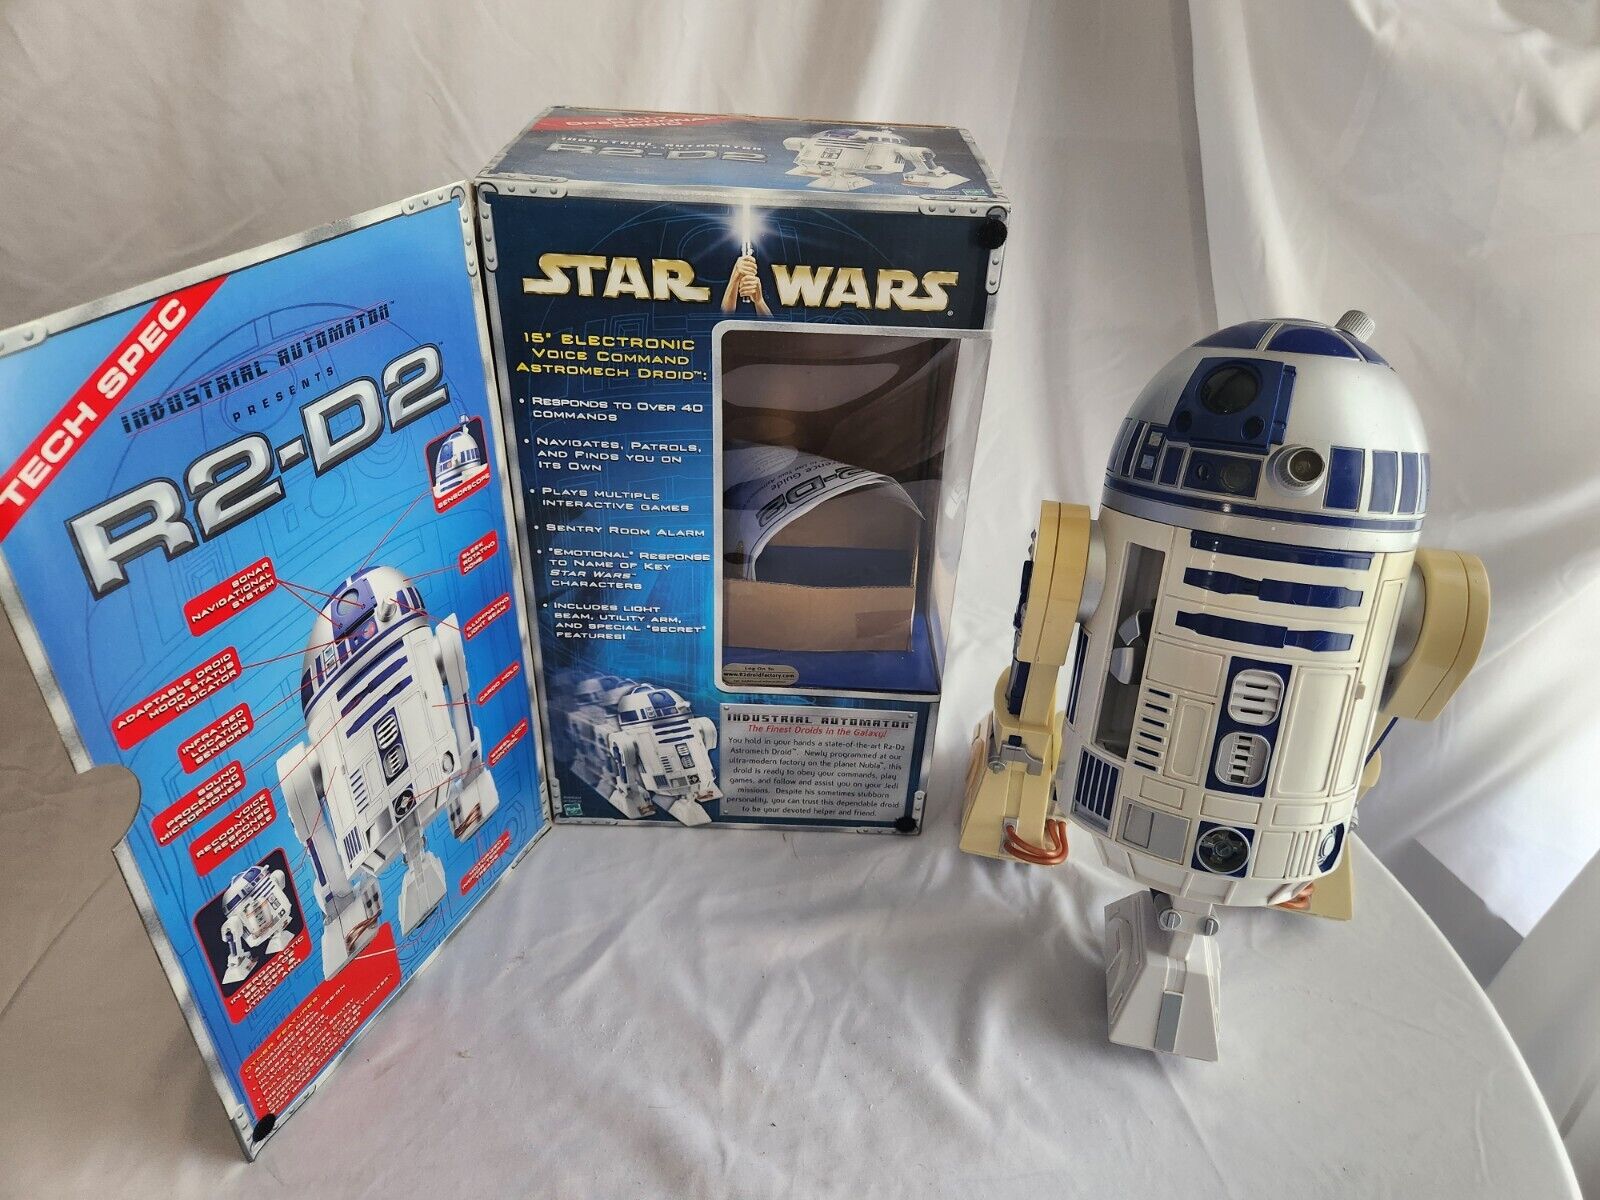 2002 Industrial Automation Interactive Voice Command R2D2 W/ Box